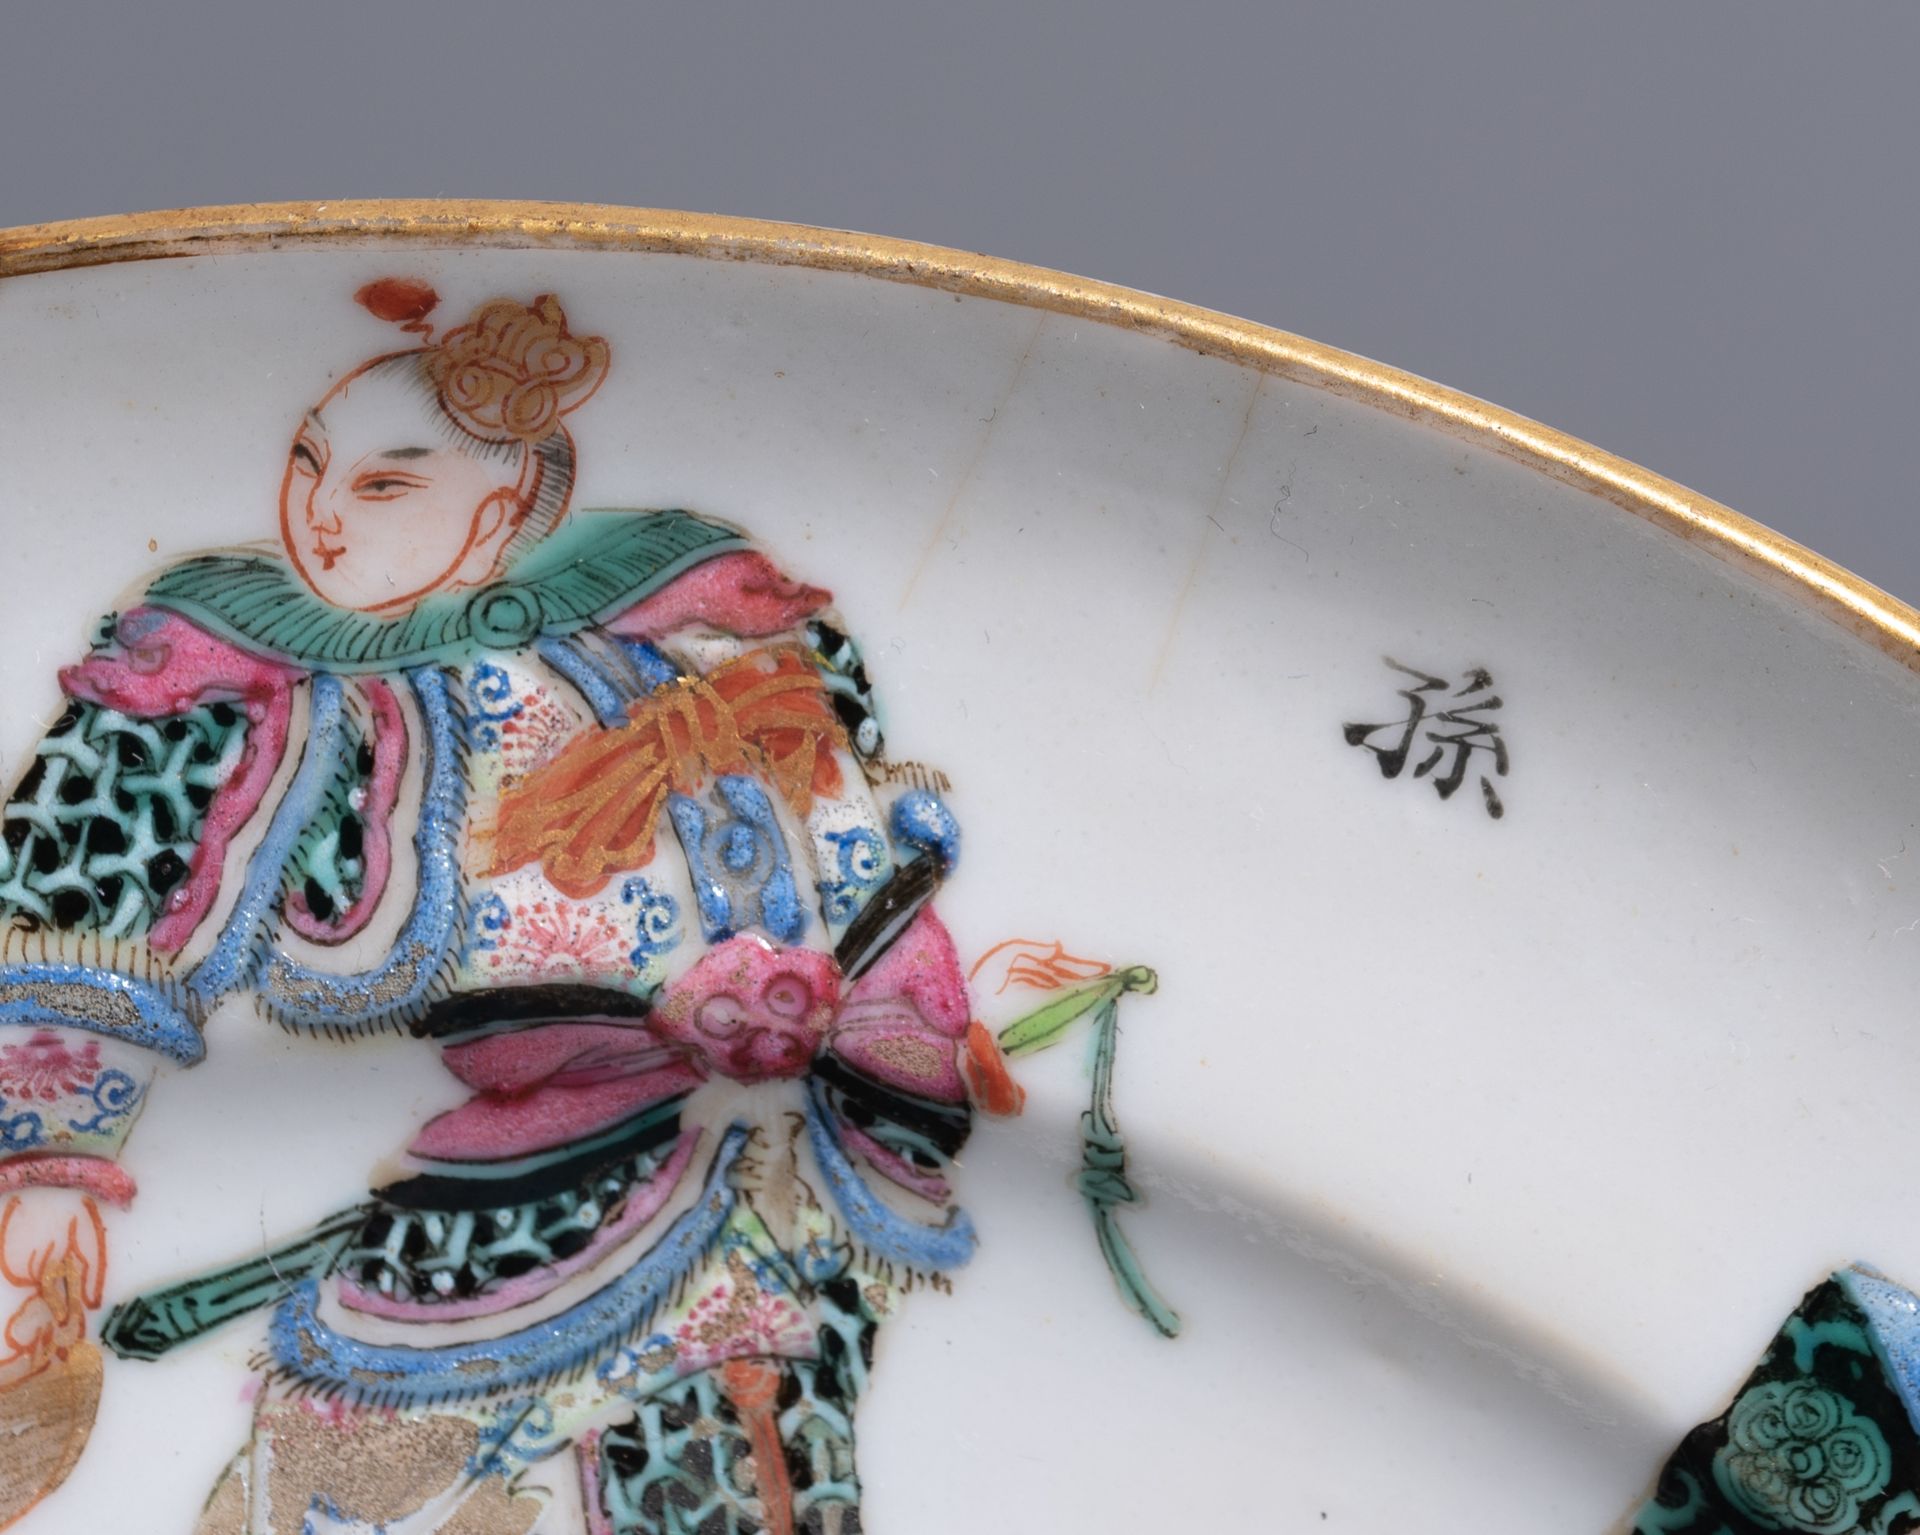 A collection of Chinese and Japanese porcelain items, 18th / 19th / 20thC, H 4 - 47 - ø 10,5 - 23 cm - Image 18 of 19